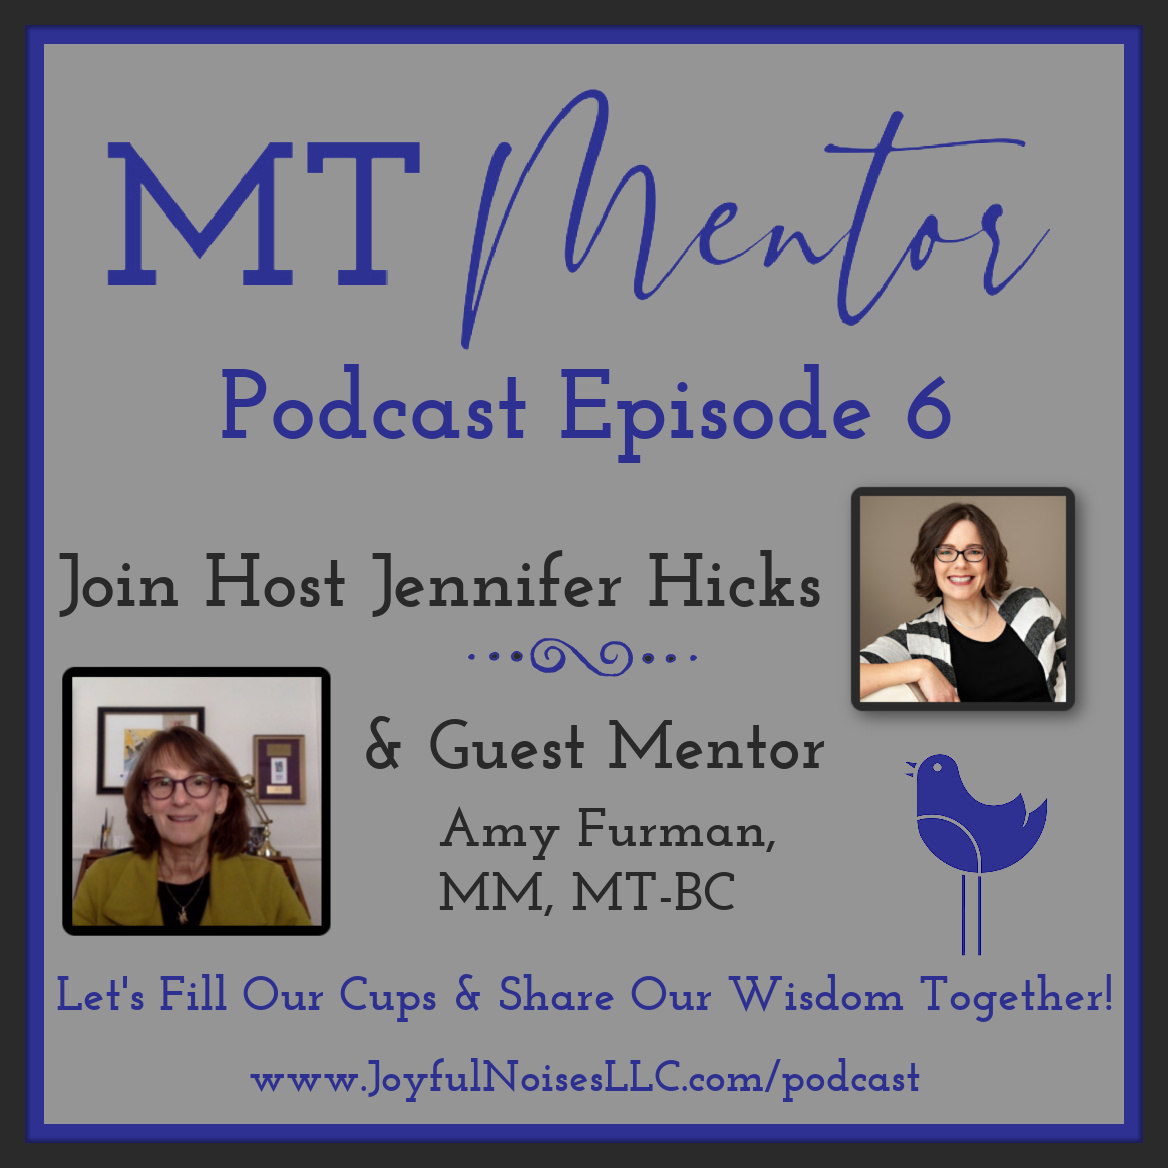 Headshots of host Jennifer Hicks and guest mentor Amy Furman with the podcast title and tagline